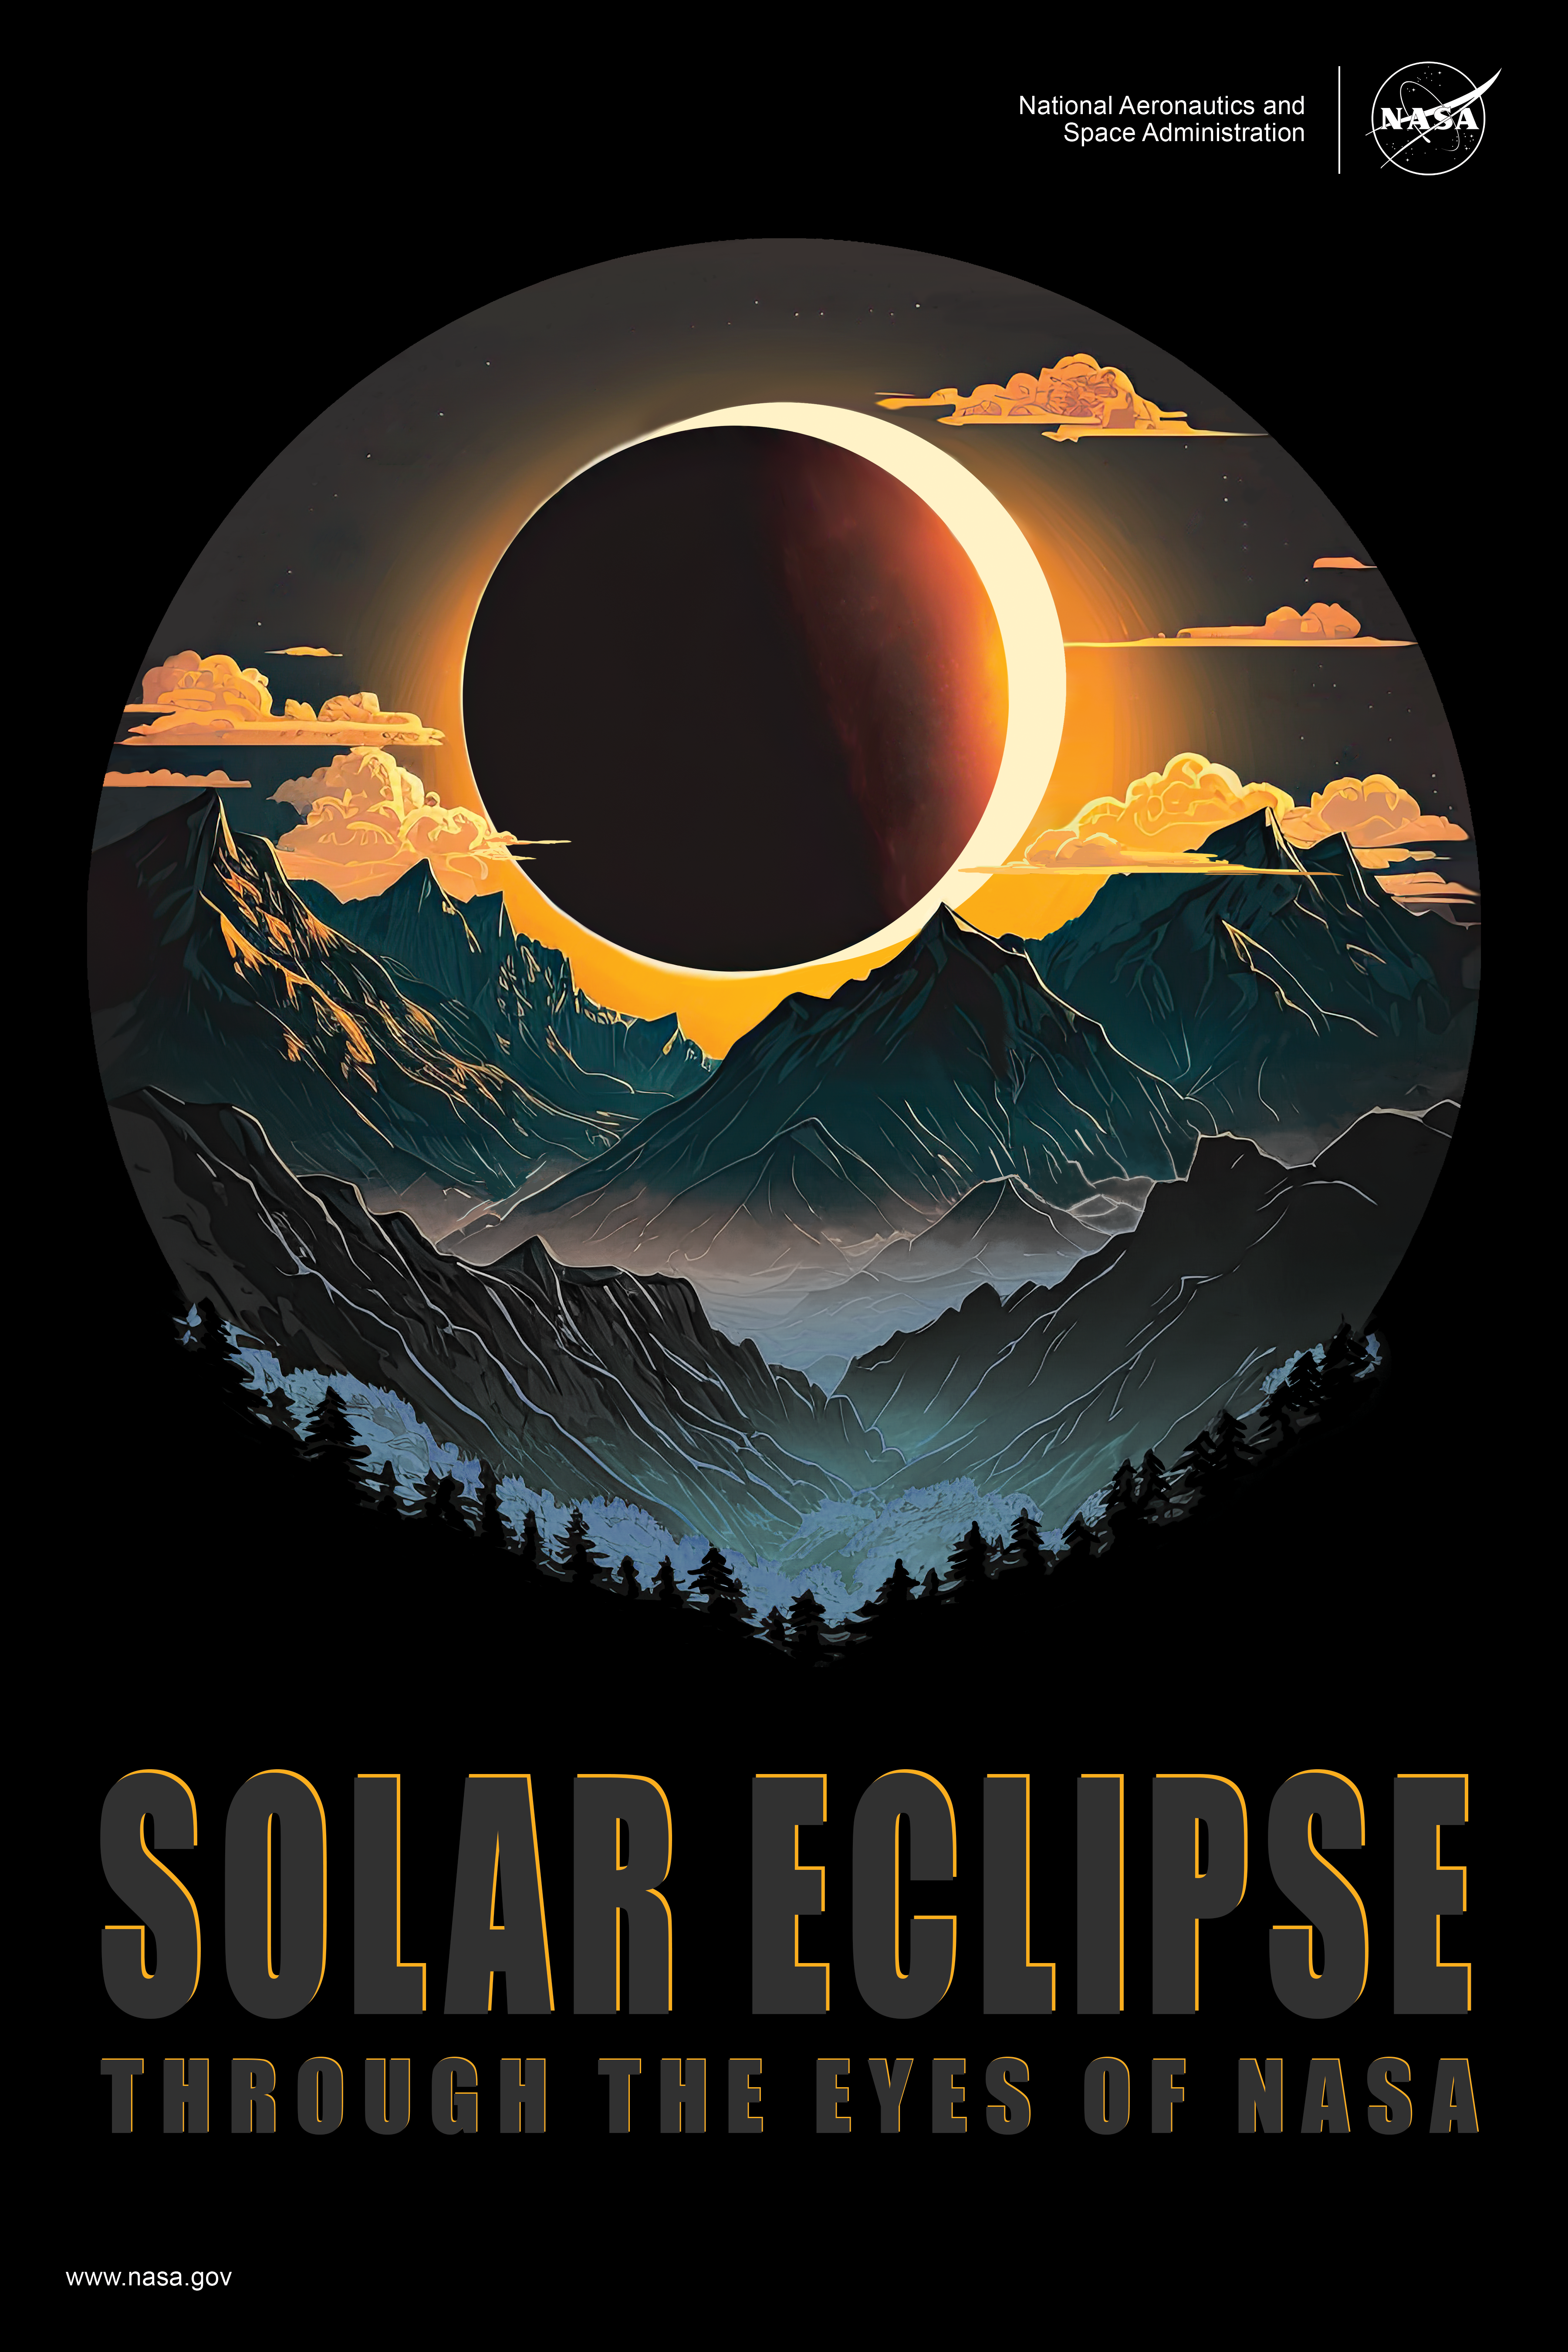 Against a black background, a circle reveals a scene. Inside the circle is a large Sun, mostly blocked by the dark circle of the Moon. Clouds are illuminated in a rosy orange and some stars twinkle in a gray sky. Beneath the eclipse is a large jagged mountain range and the peaks of trees. In block letters at the bottom of the poster, it reads Solar Eclipse Through the Eyes of NASA.